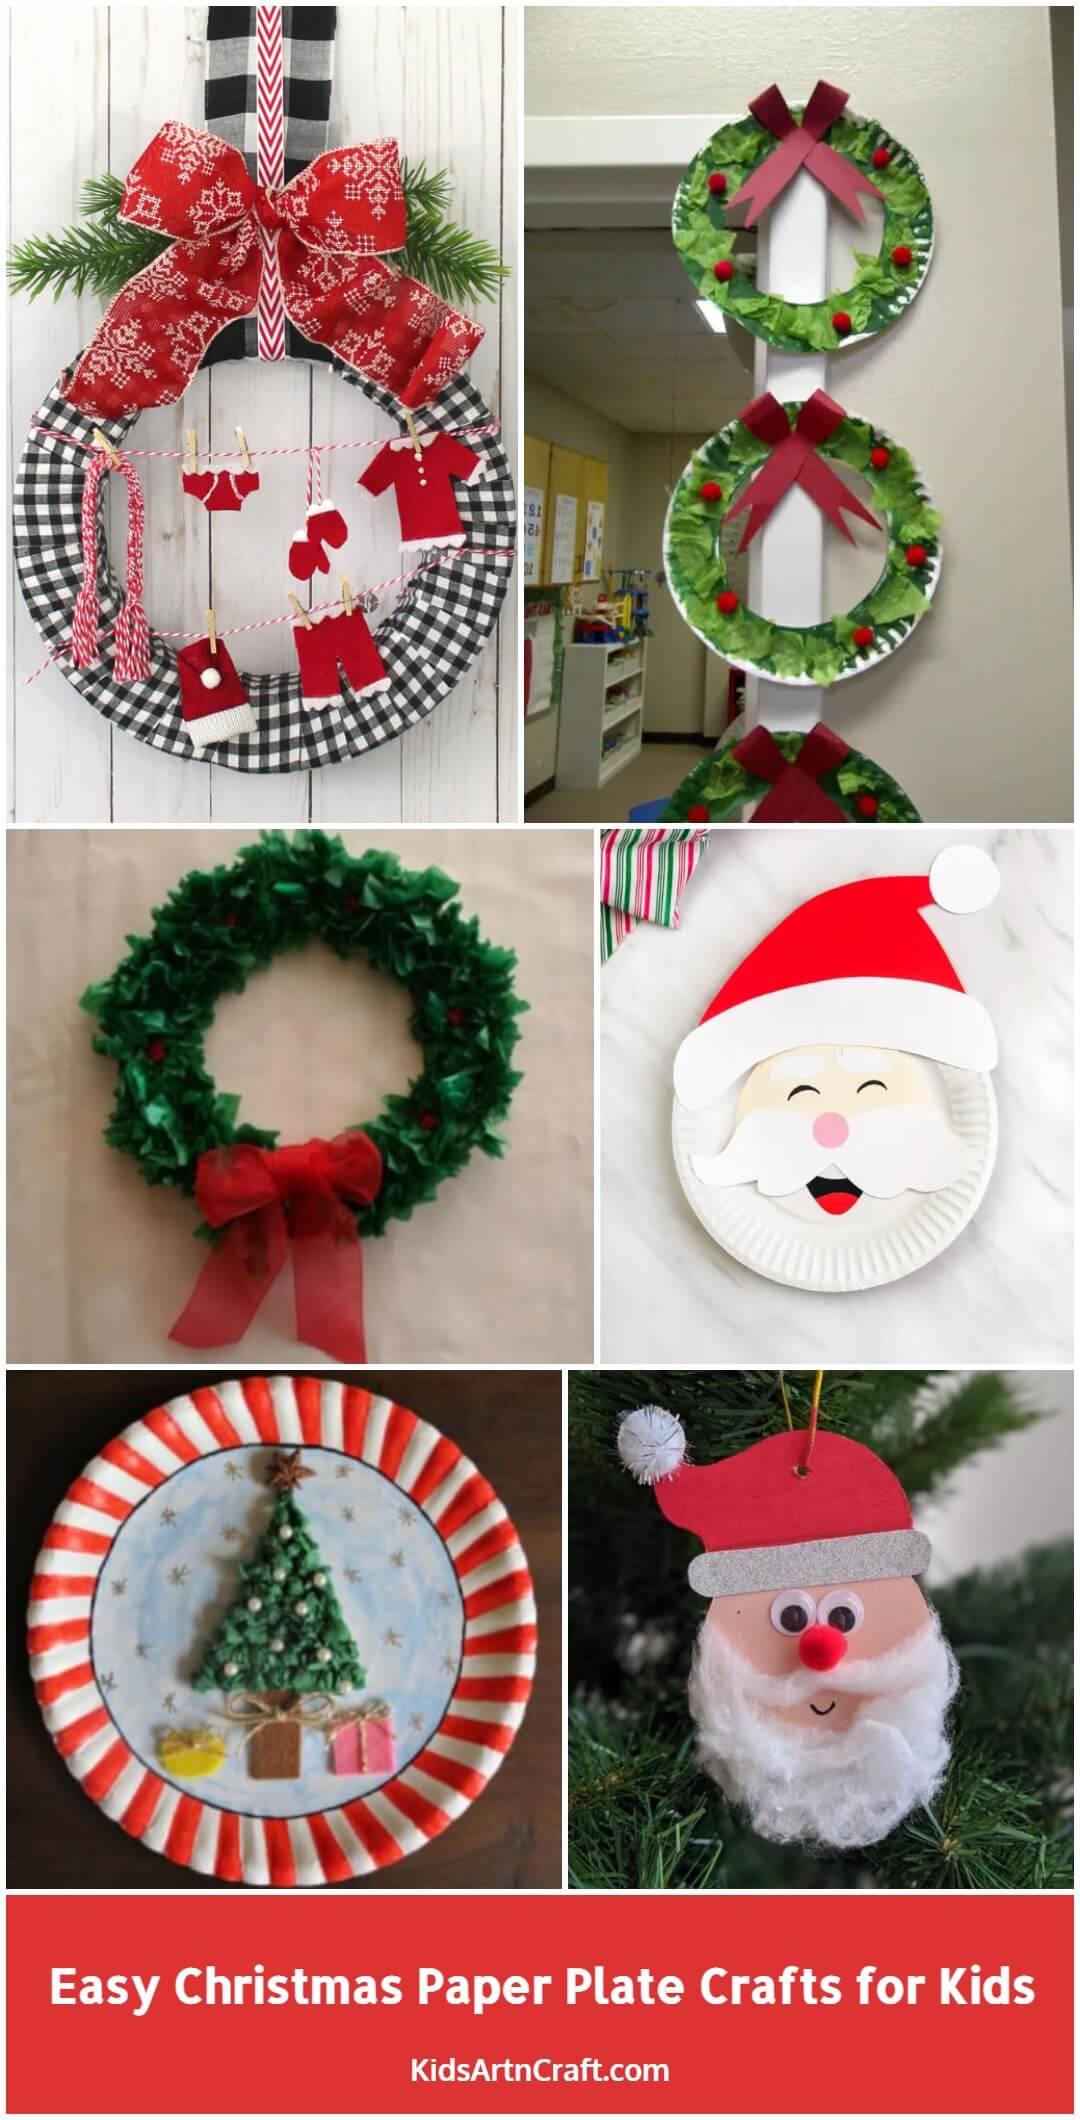 Easy Christmas Paper Plate Crafts for Kids